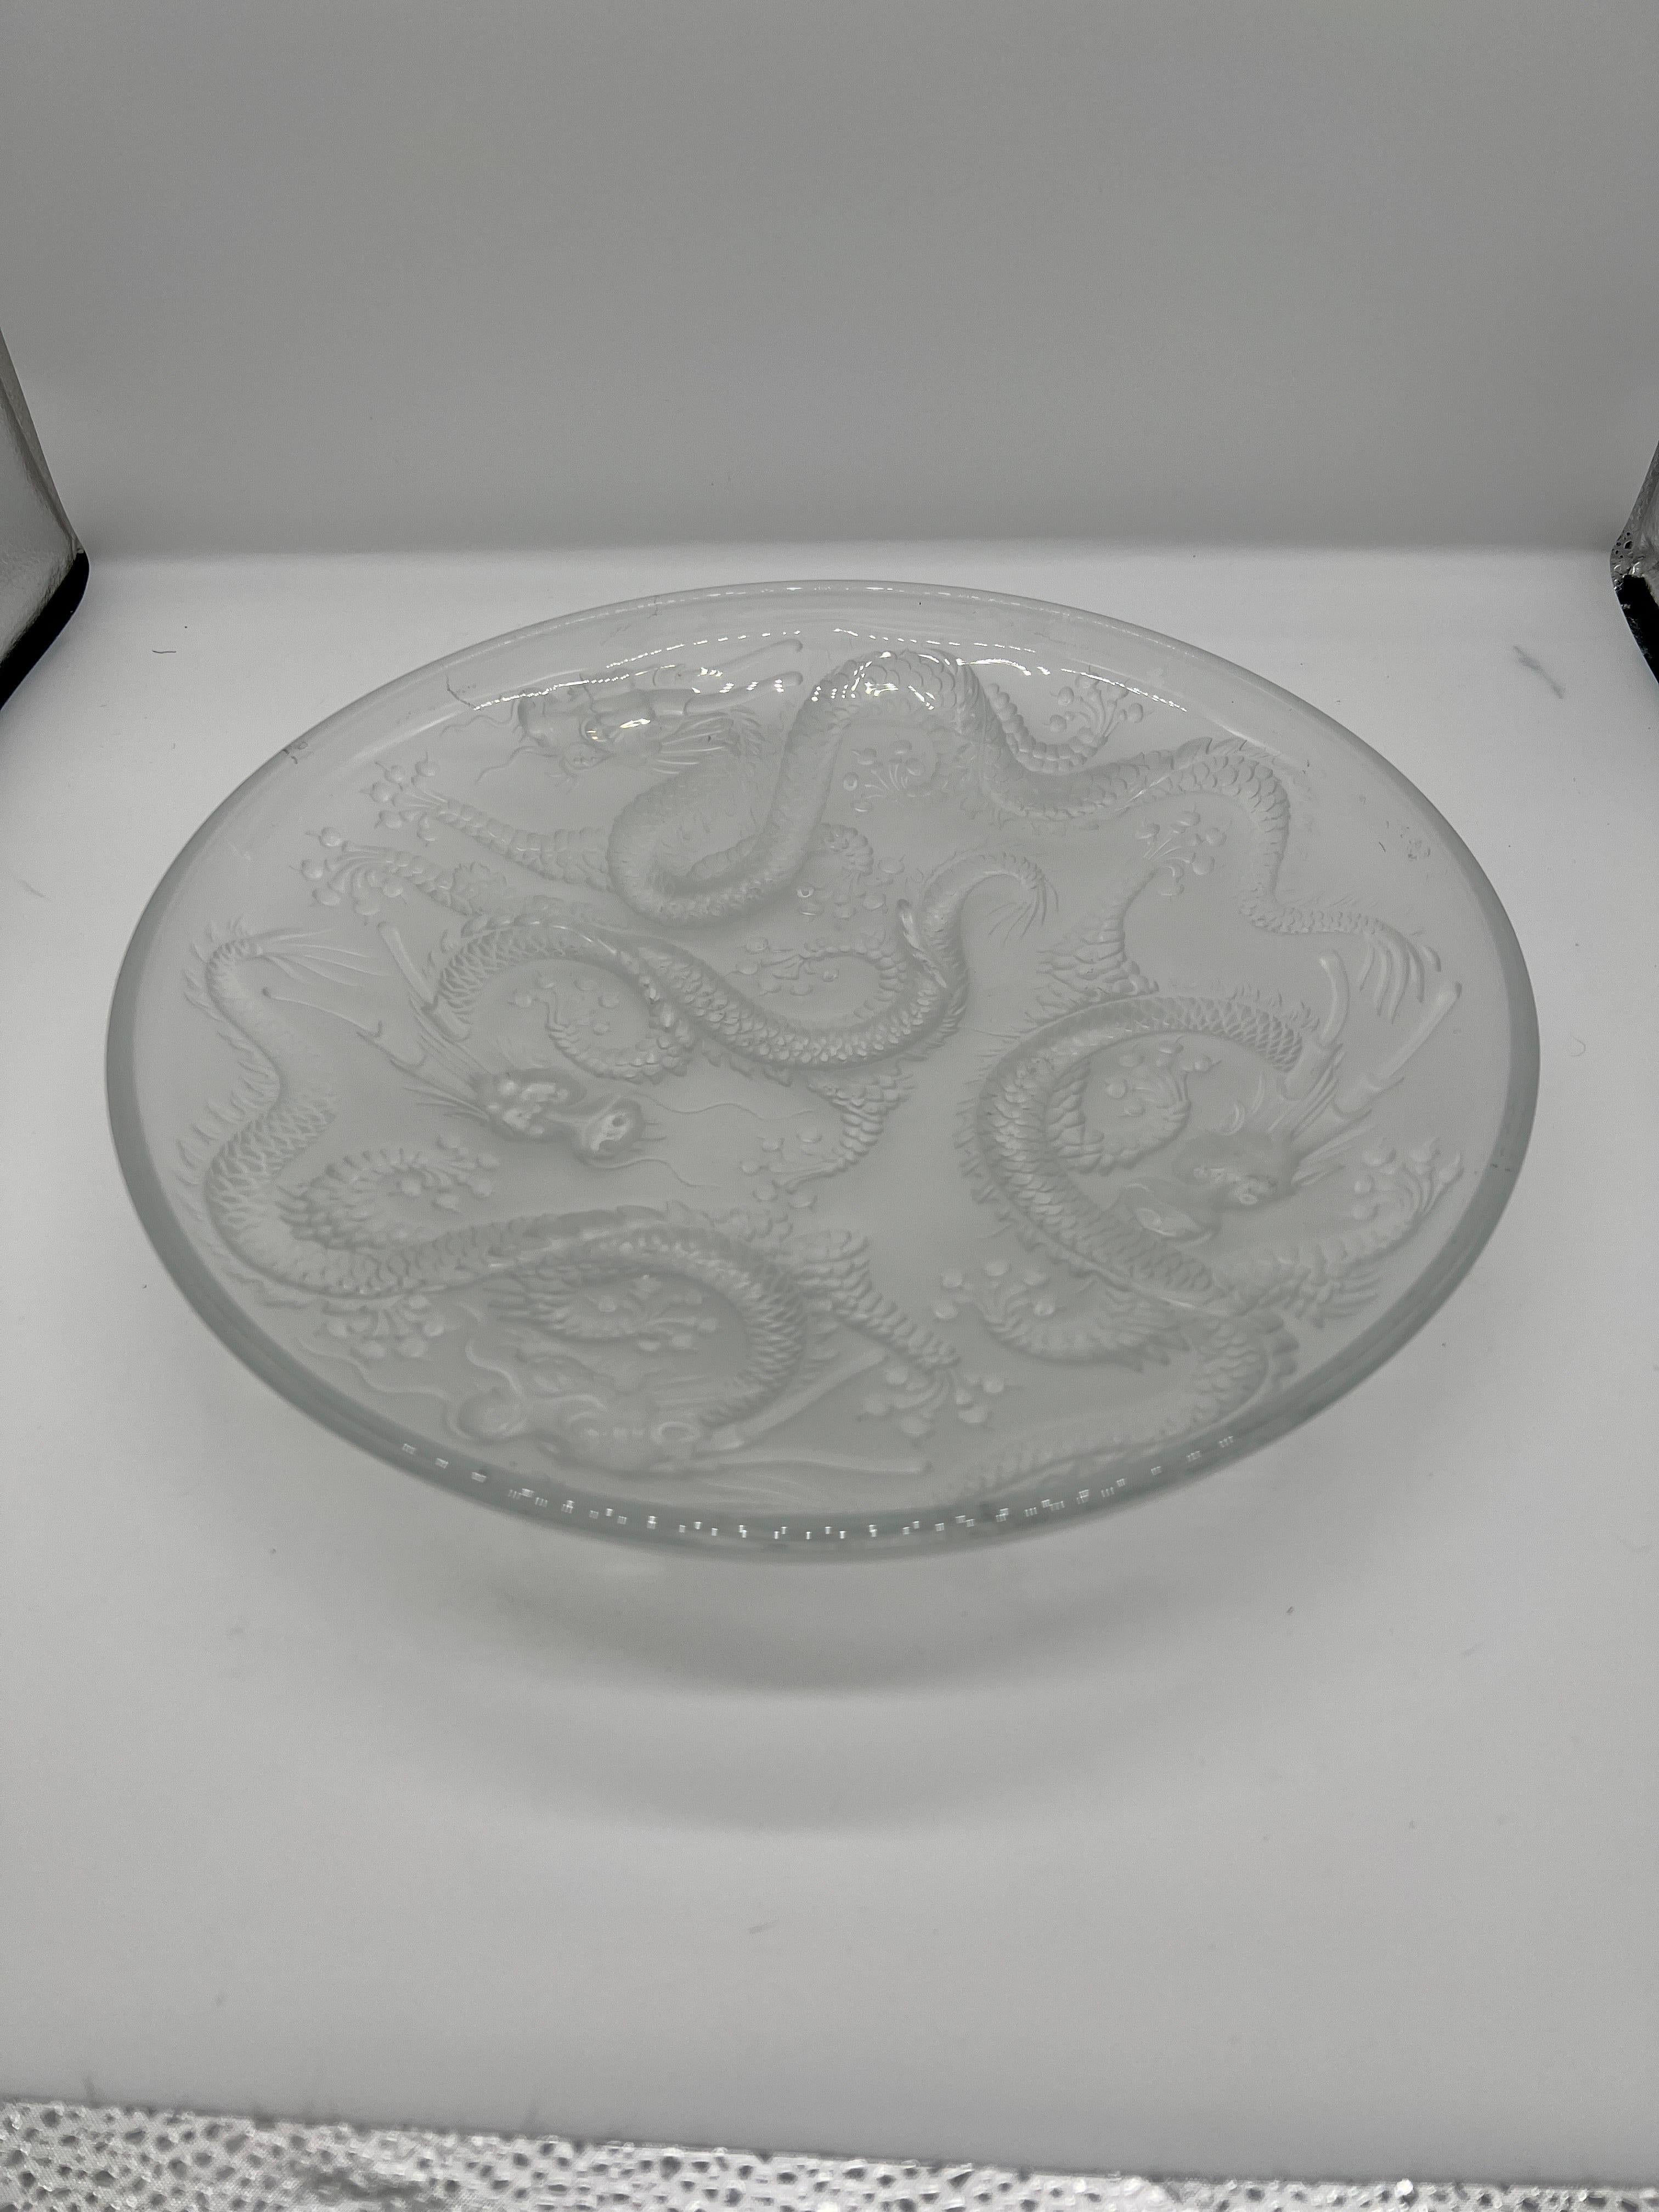 Josef Inwald, circa 1930. 

A good quality and large platter made of glass with 4 dragons. Beautiful chinoiserie decoration to the surface - well known pattern. 

